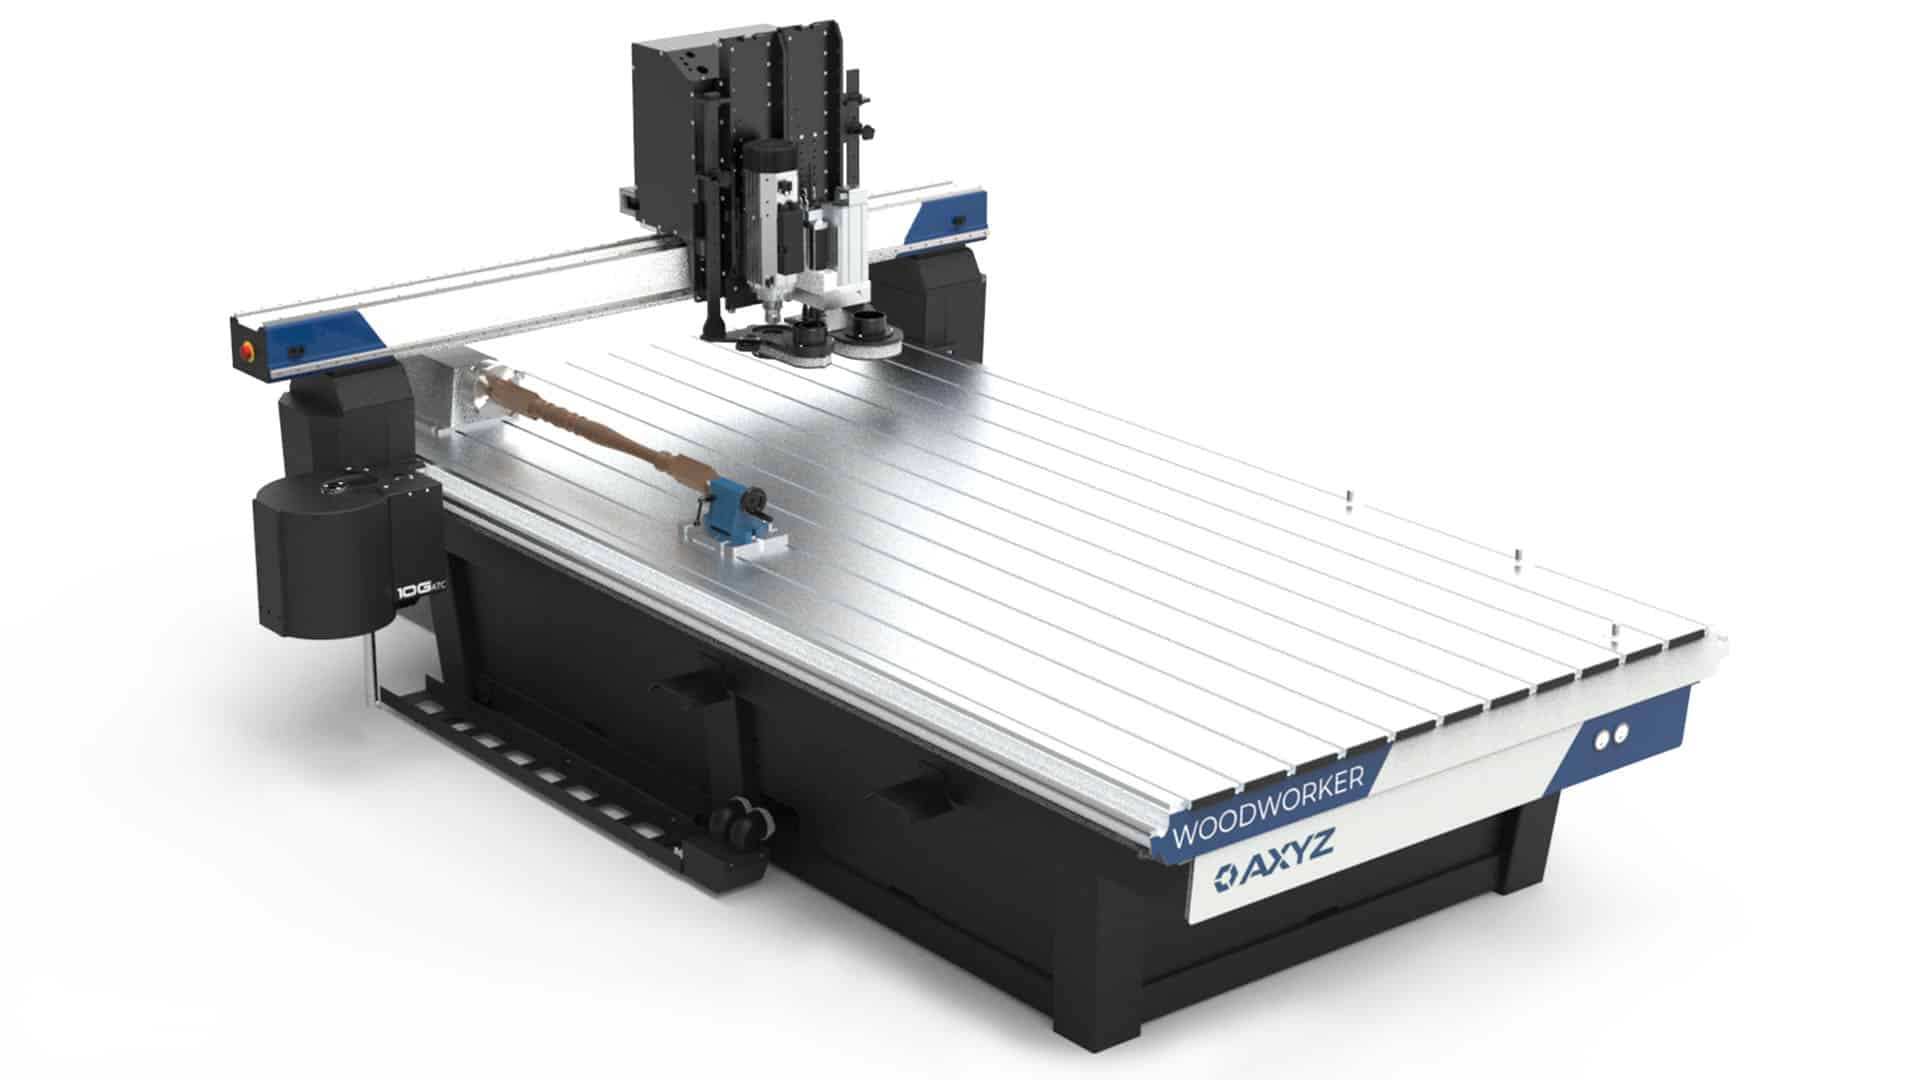 Axyz Woodworker WoodWorker cnc router 16 9 v3 vikiallo